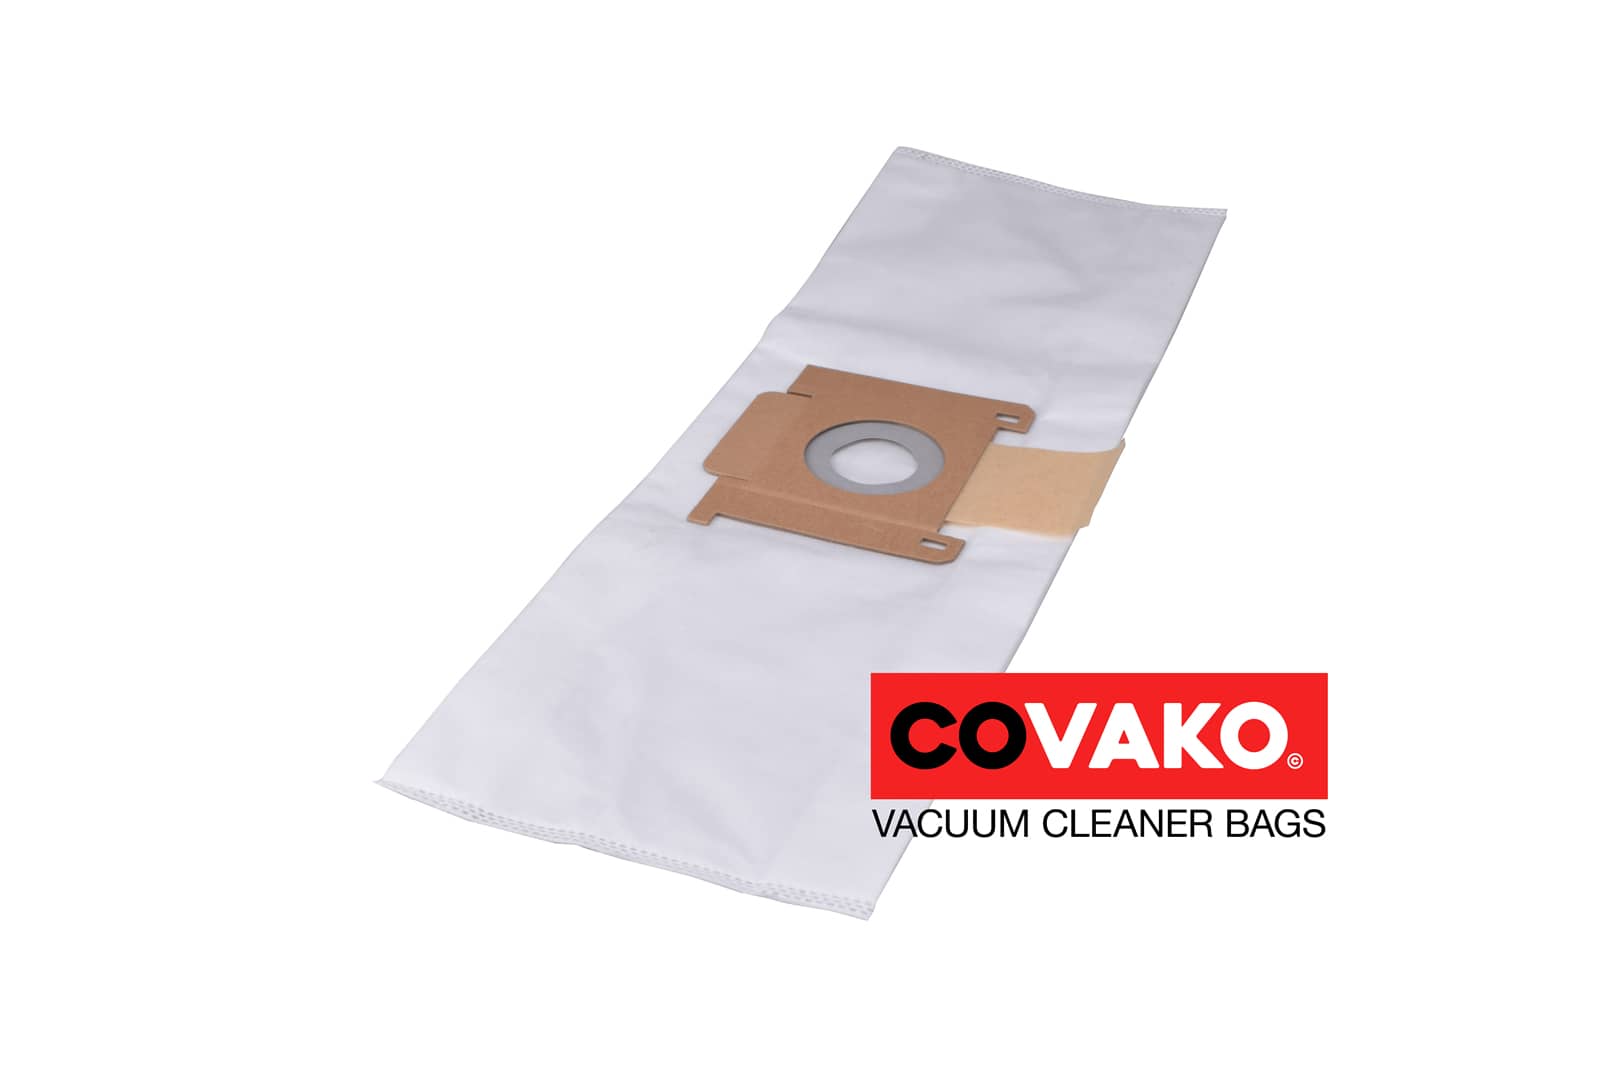 Fast I-vac C5 / Synthesis - Fast vacuum cleaner bags